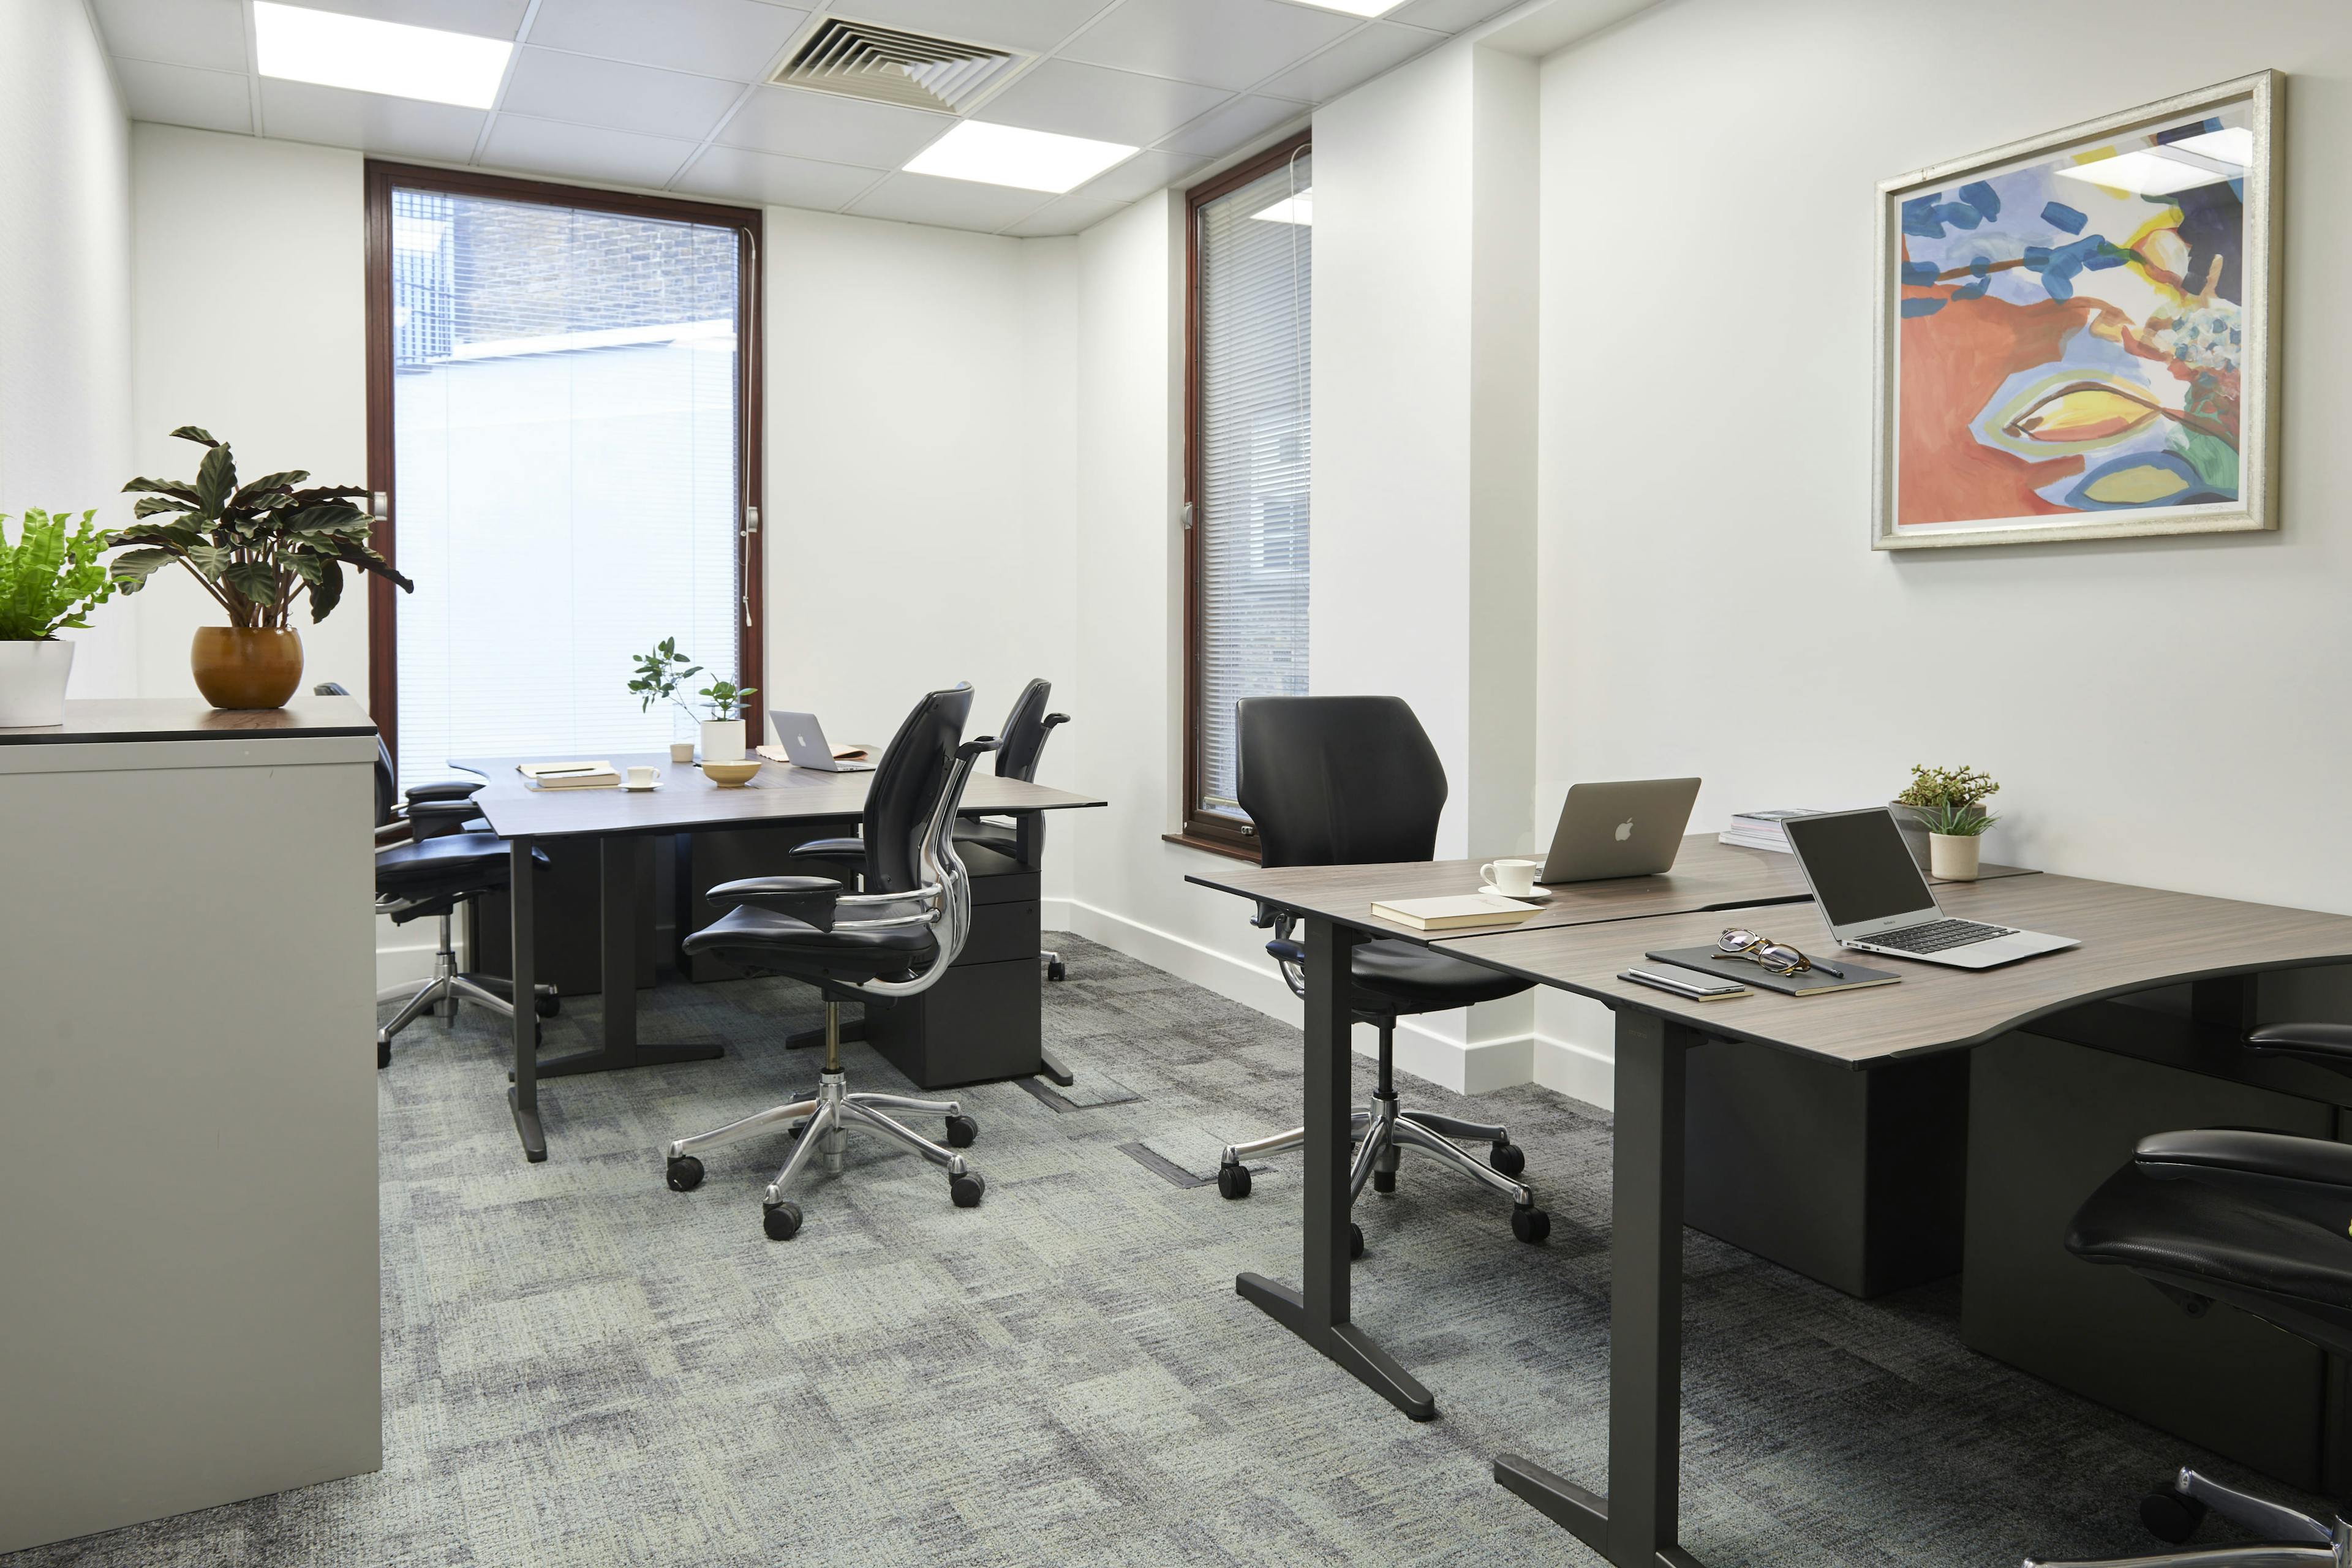 St Pauls – 11 Person Office – Snow Hill